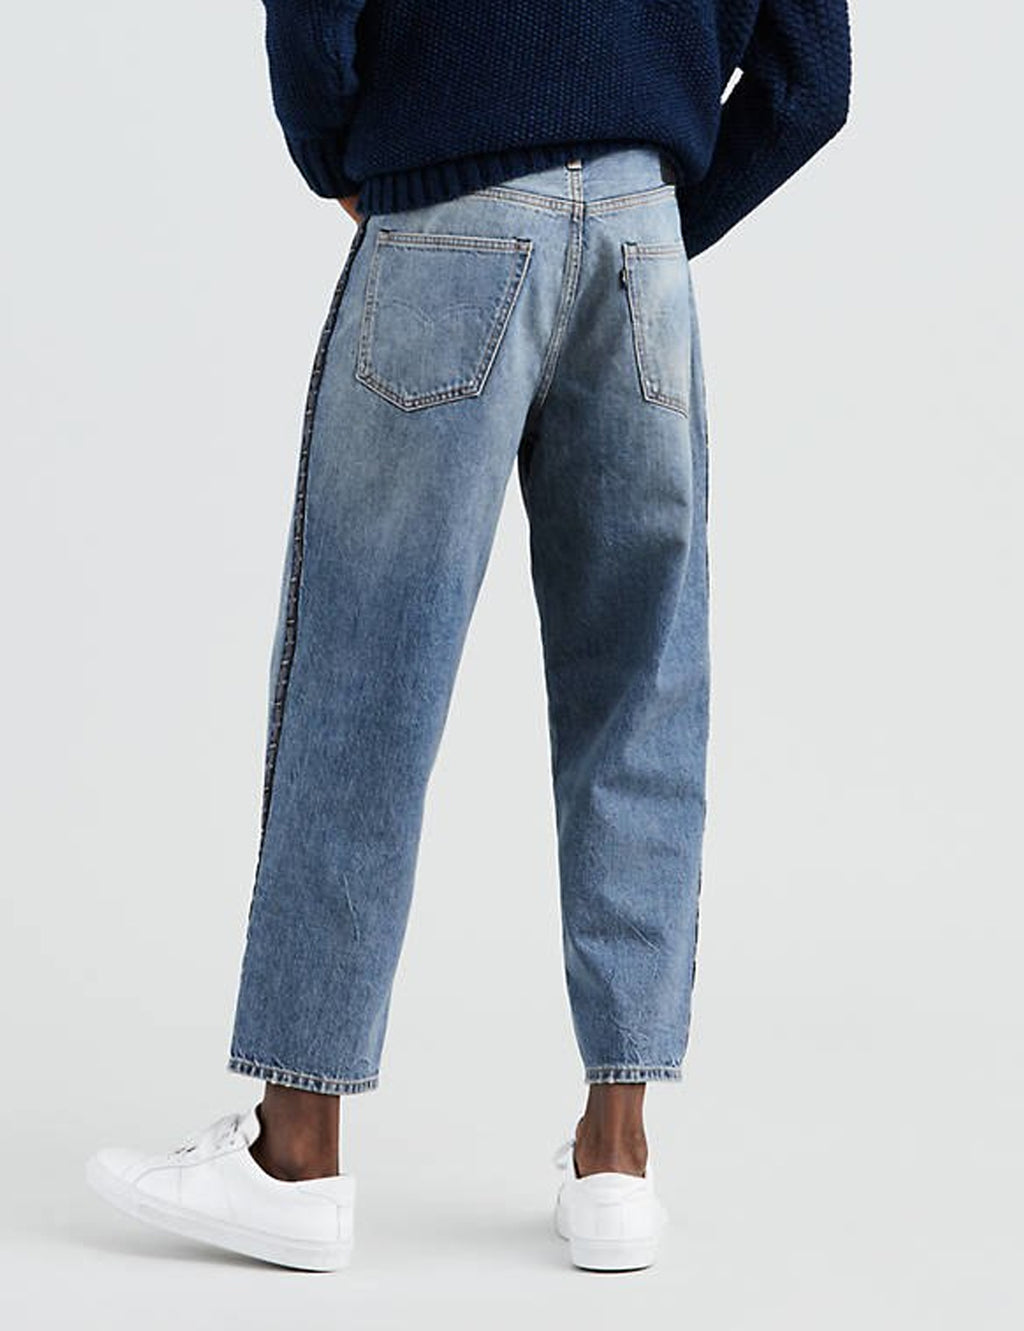 Levis Made & Crafted Draft Taper Jeans - Shamrock Blue | URBAN EXCESS.